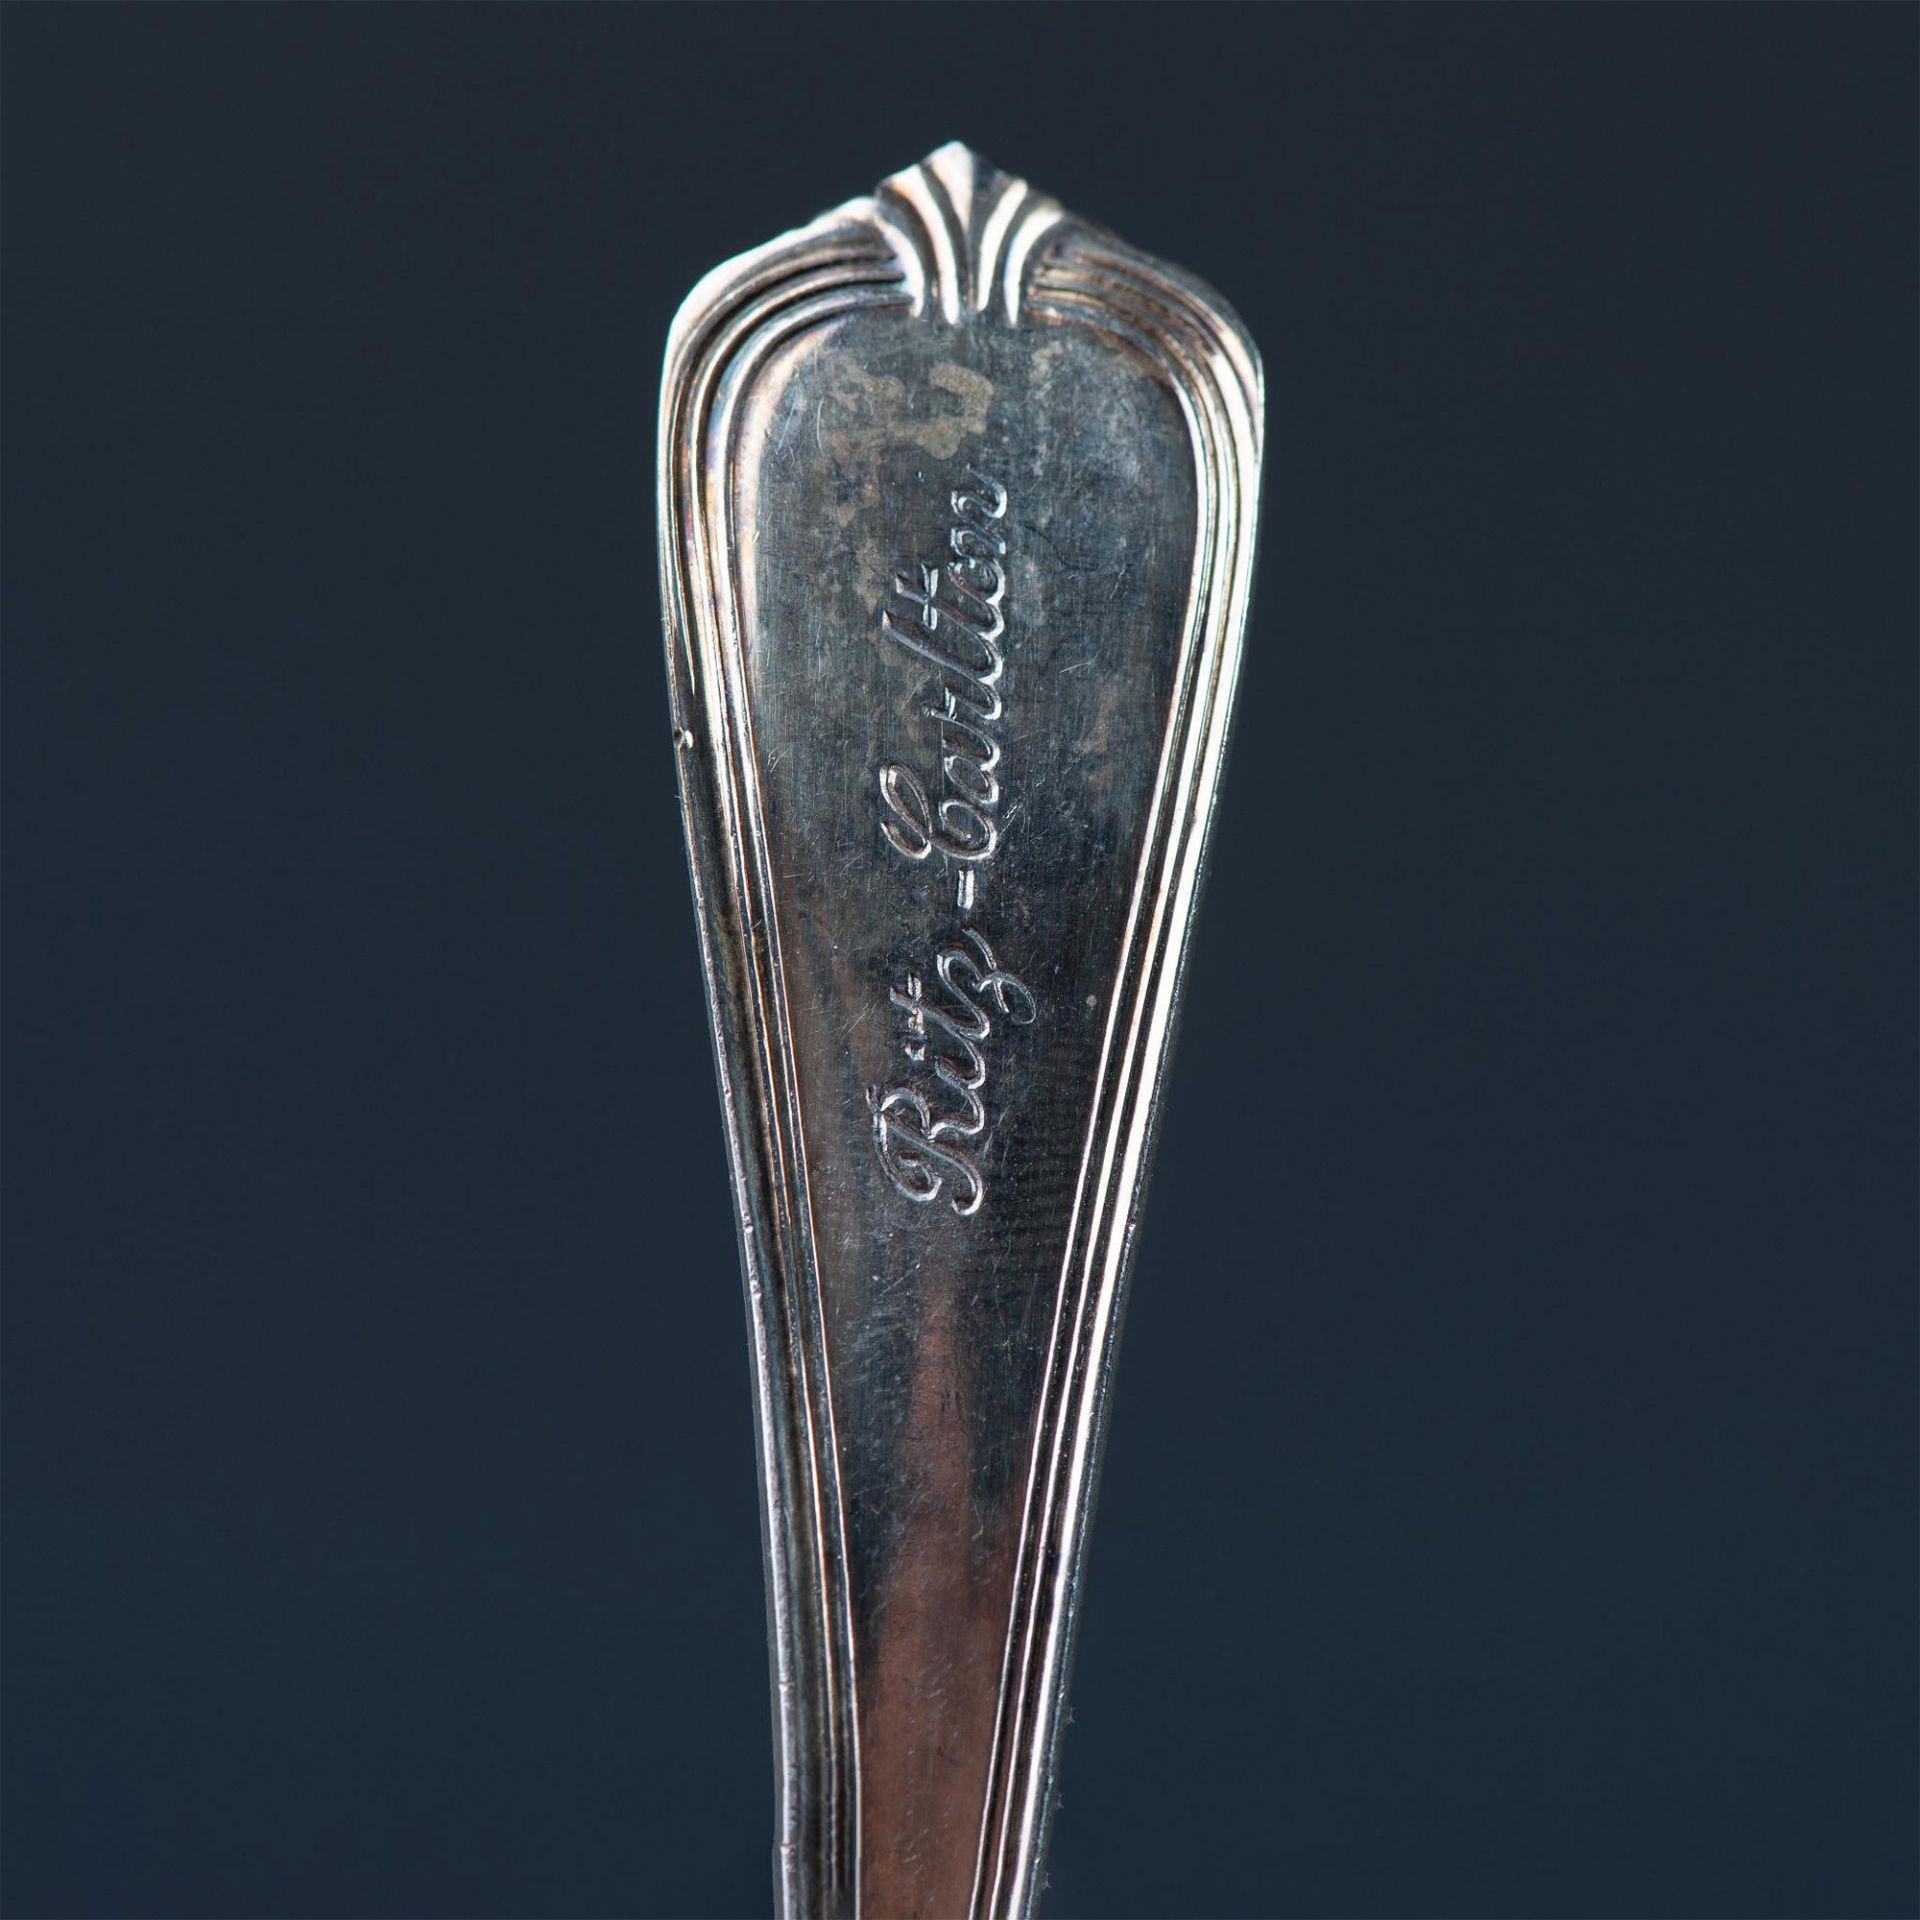 12pc Ritz-Carlton Cocktail Forks, International Silver Co. - Image 5 of 5